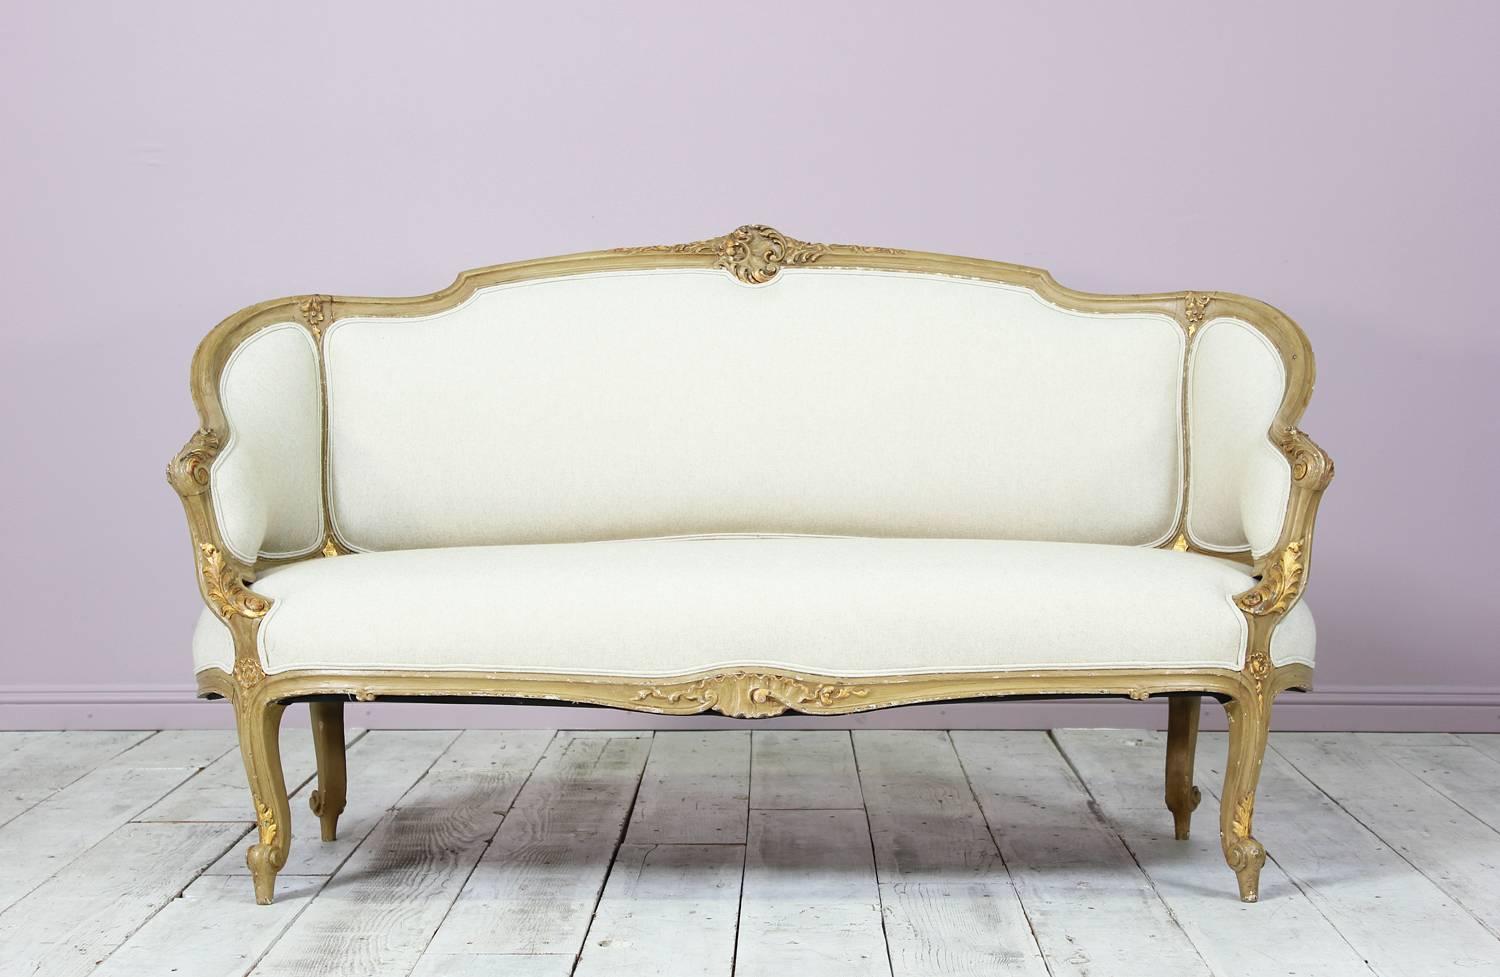 French, 1920s painted and parcel-gilt carved wood Louis XV style settee with new linen canvas upholstery. Paint finish is naturally distressed. The settee is sturdy and newly upholstered in a beautiful and durable linen-canvas fabric. Ready for many